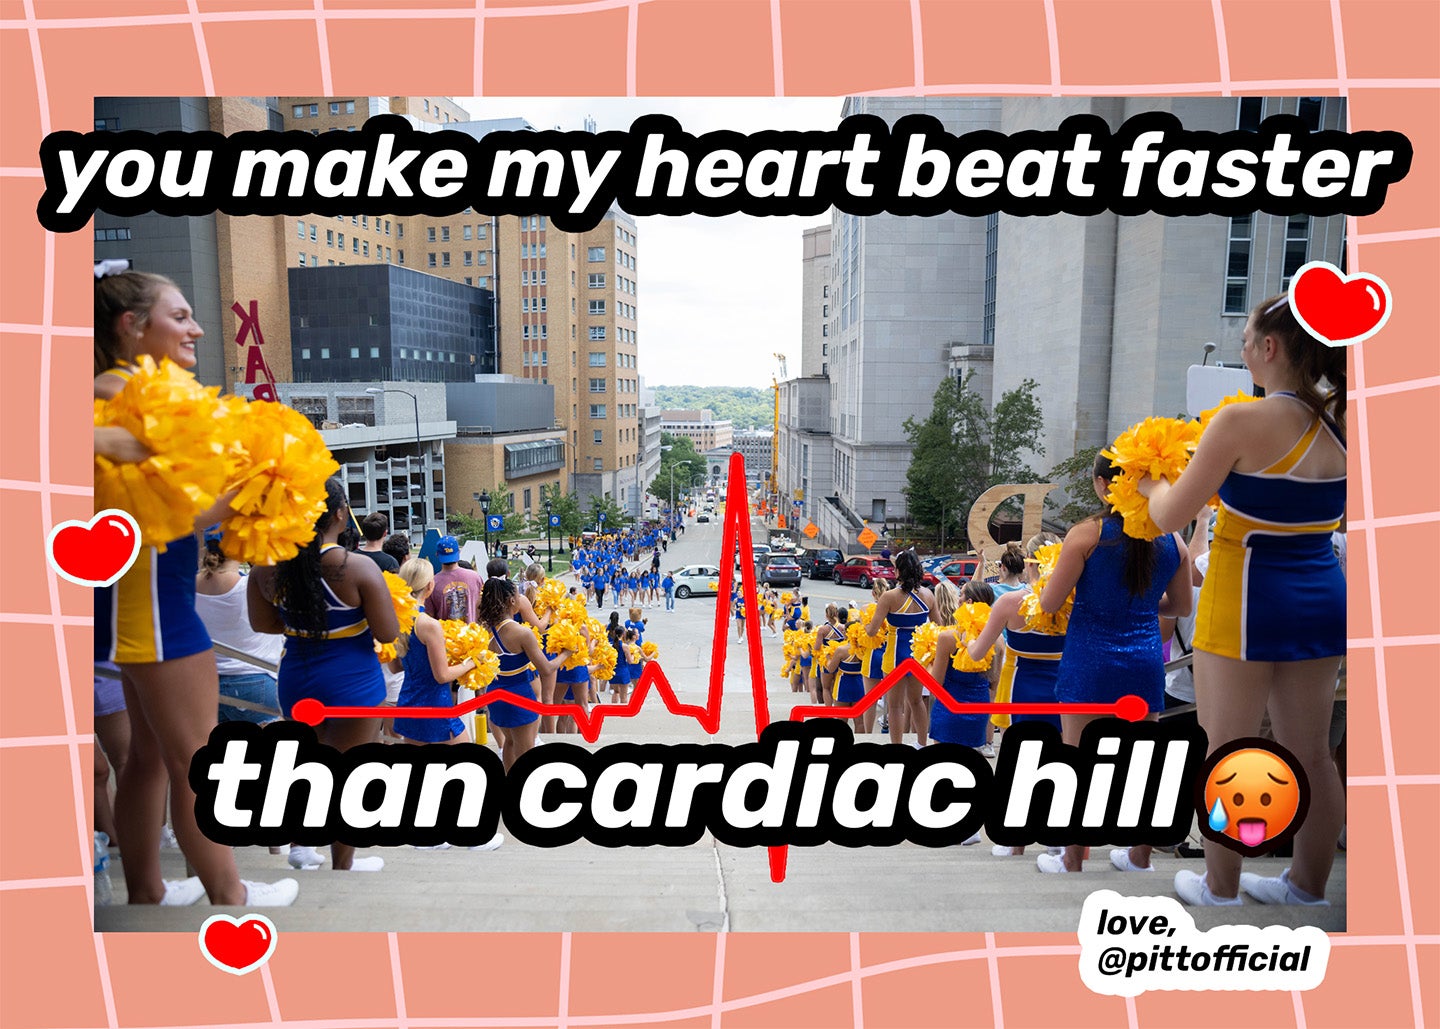 Pitt's marching band plays on cardiac hill with an illustrated heart monitor line. Caption: you make my heart beat faster than cardiac hill